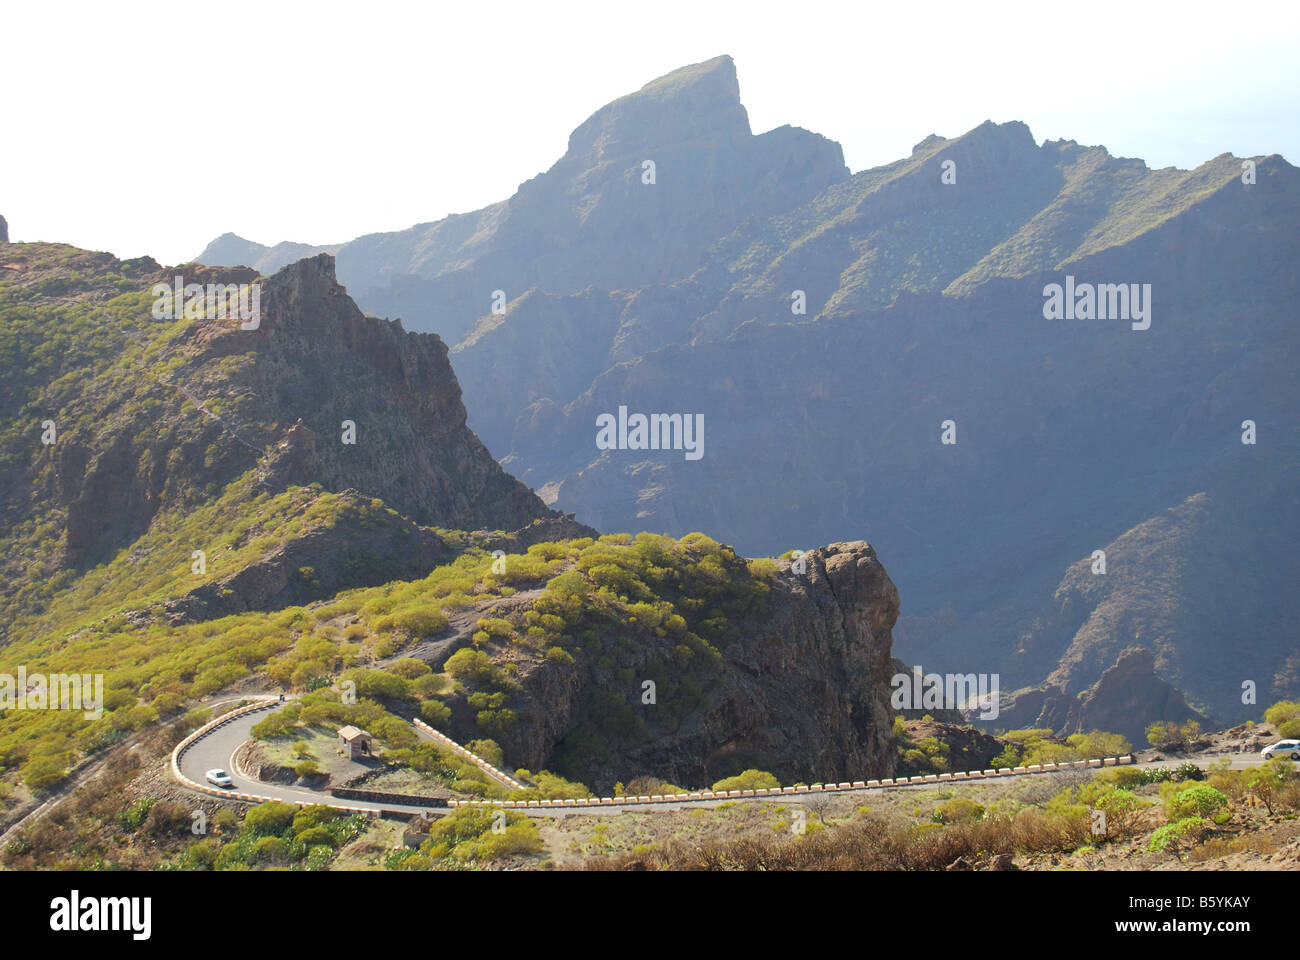 Mountain road to village of Masca, Tenerife, Canary Islands, Spain Stock Photo